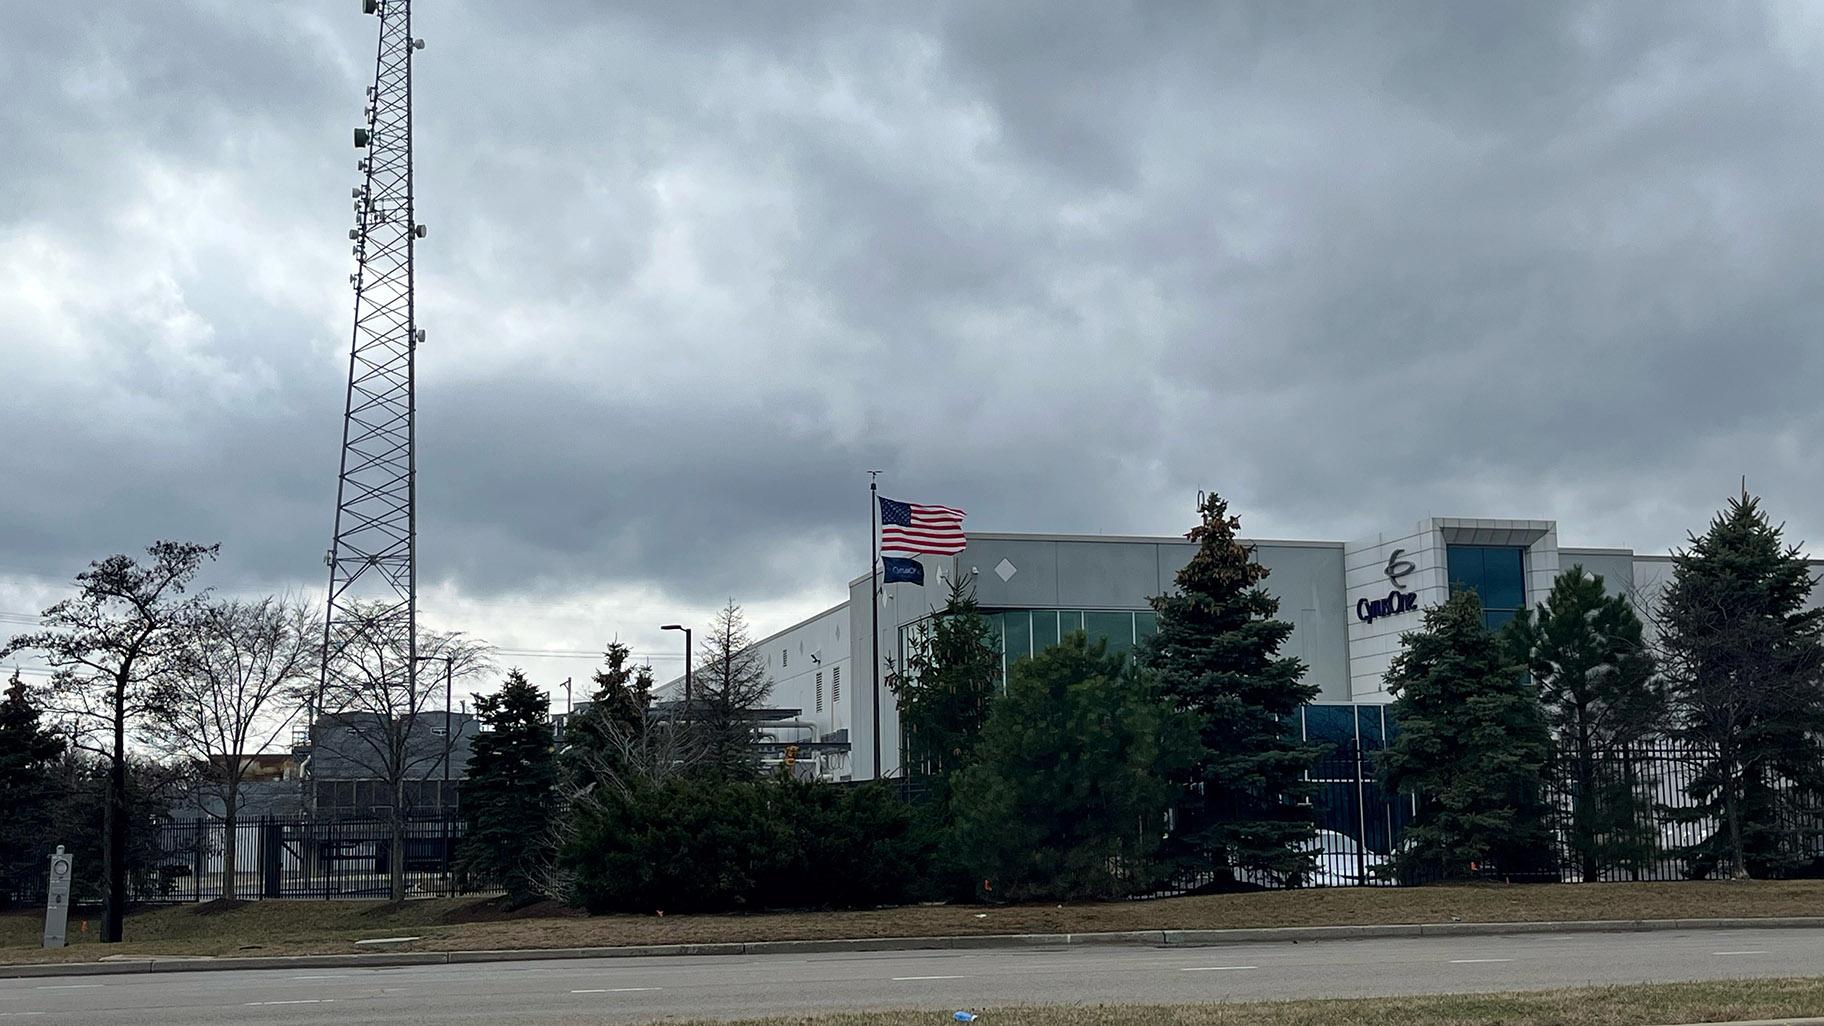 CyrusOne’s tower in Aurora is connected to a data center that houses the electronic trading platform for the Chicago-based CME Group. (Paris Schutz / WTTW)